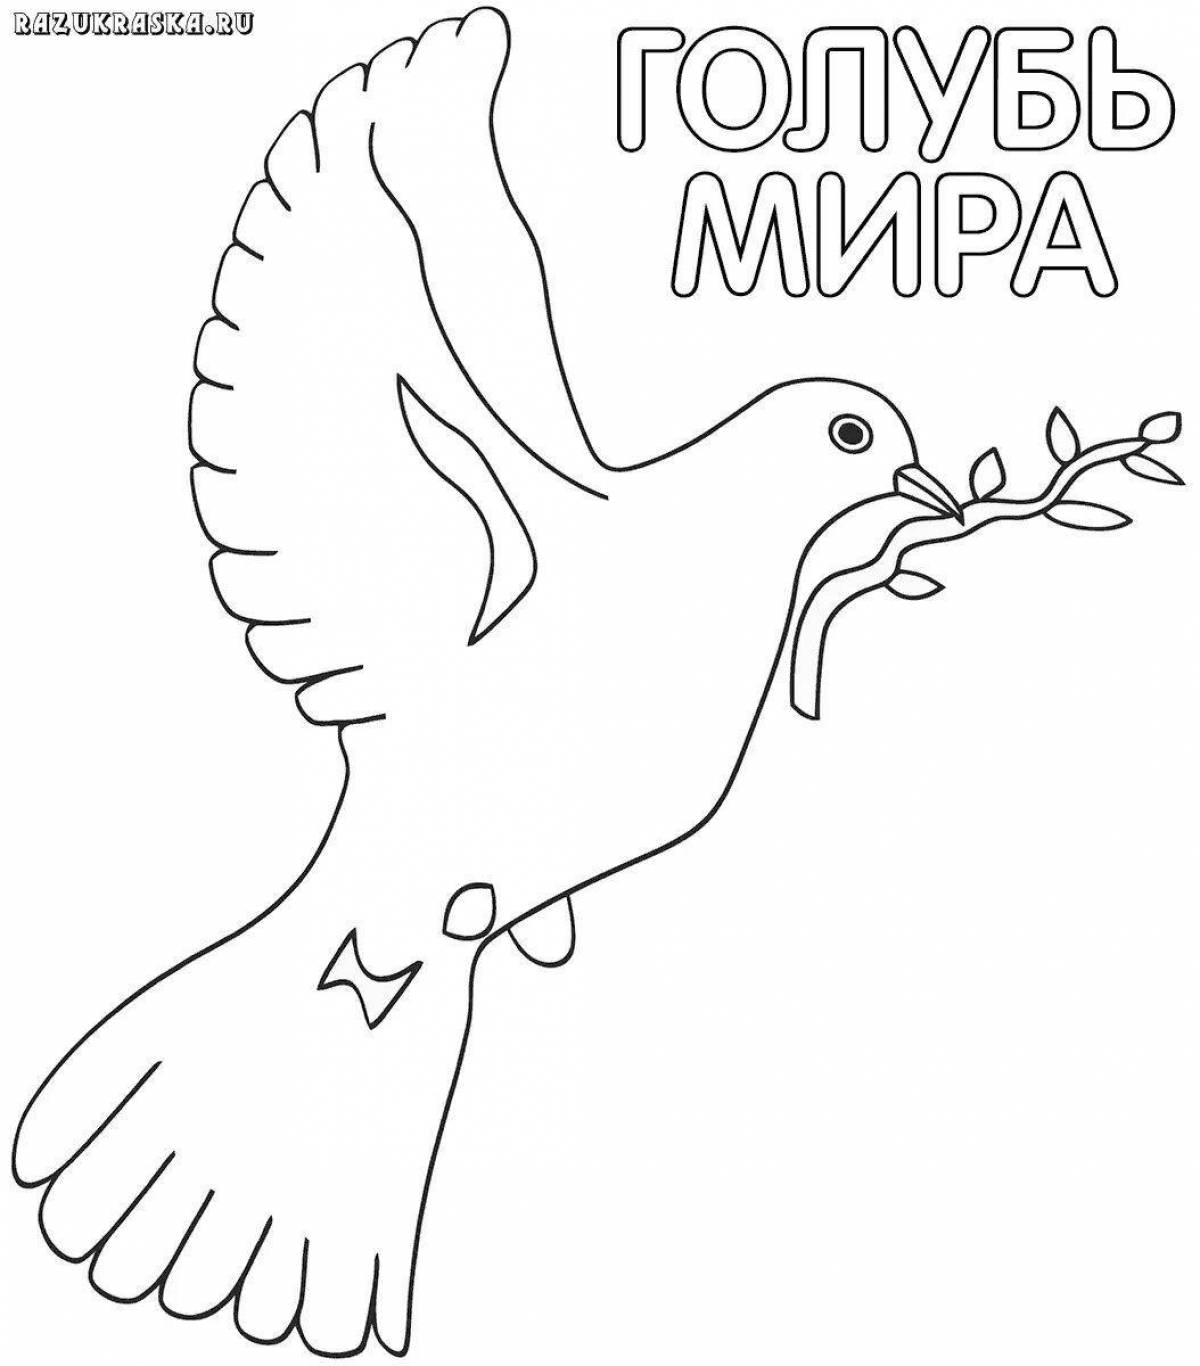 May there always be peace harmonious coloring page